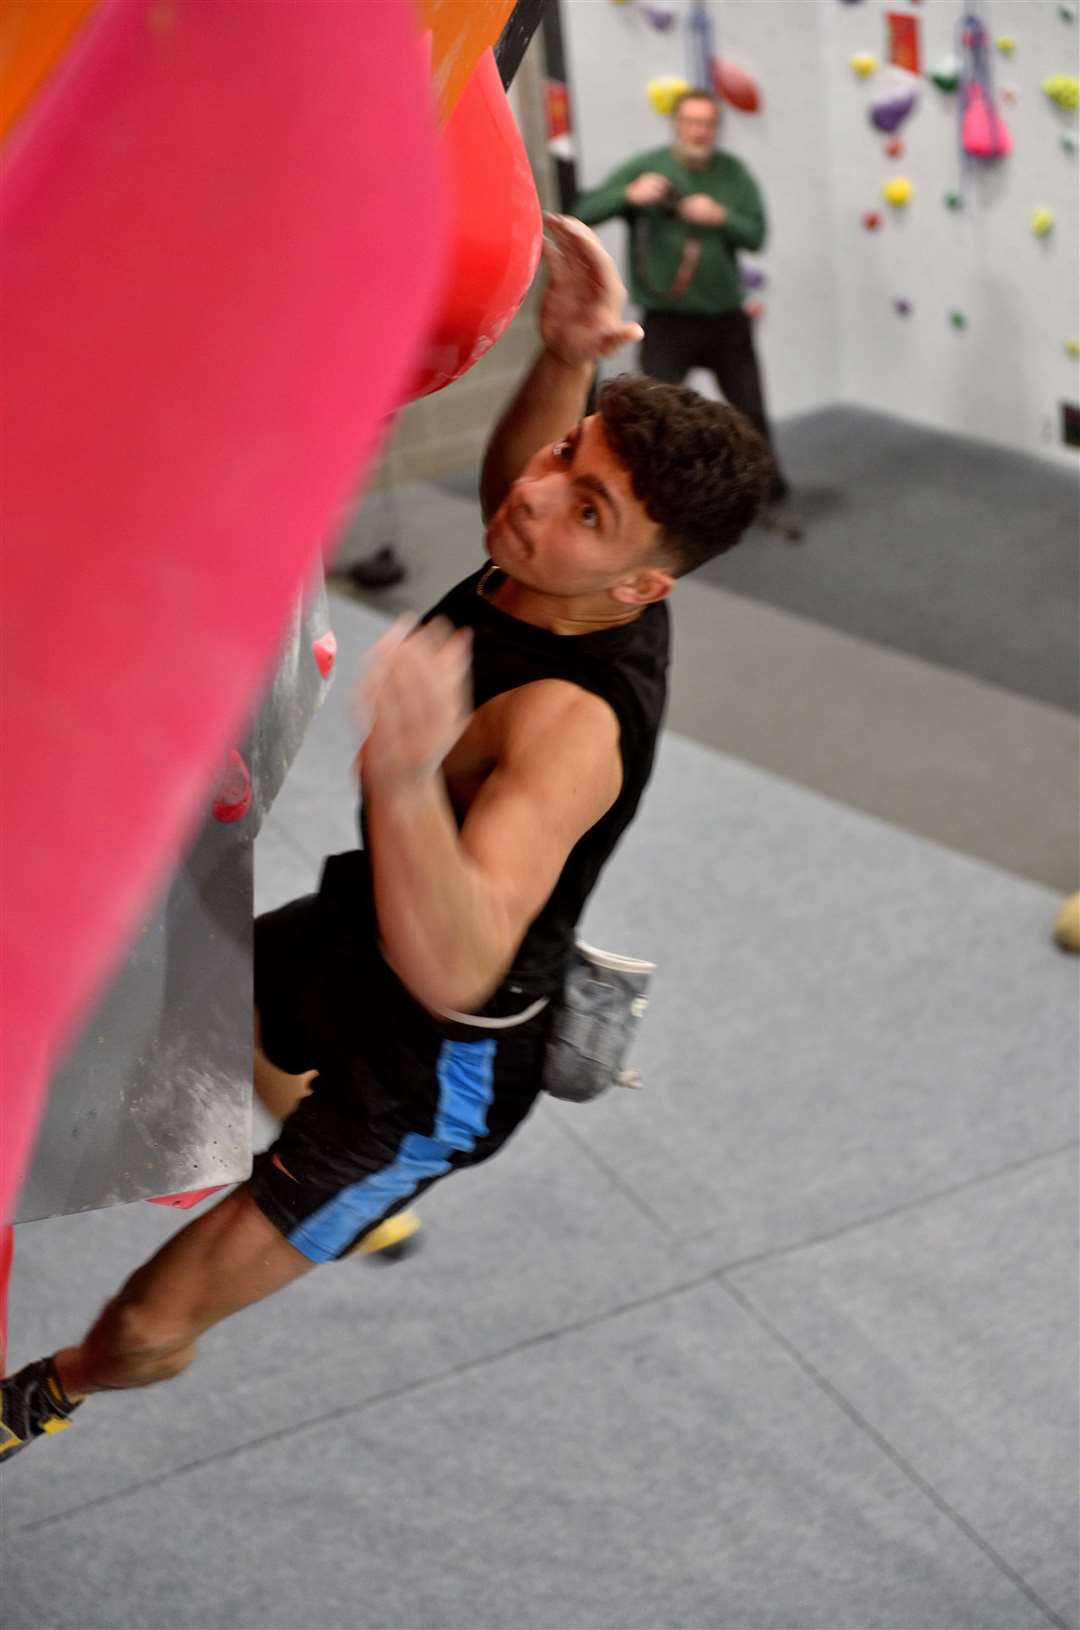 Reuben Langlands tackles one of the bouldering challenges during the competition. Picture: Ben Clarke